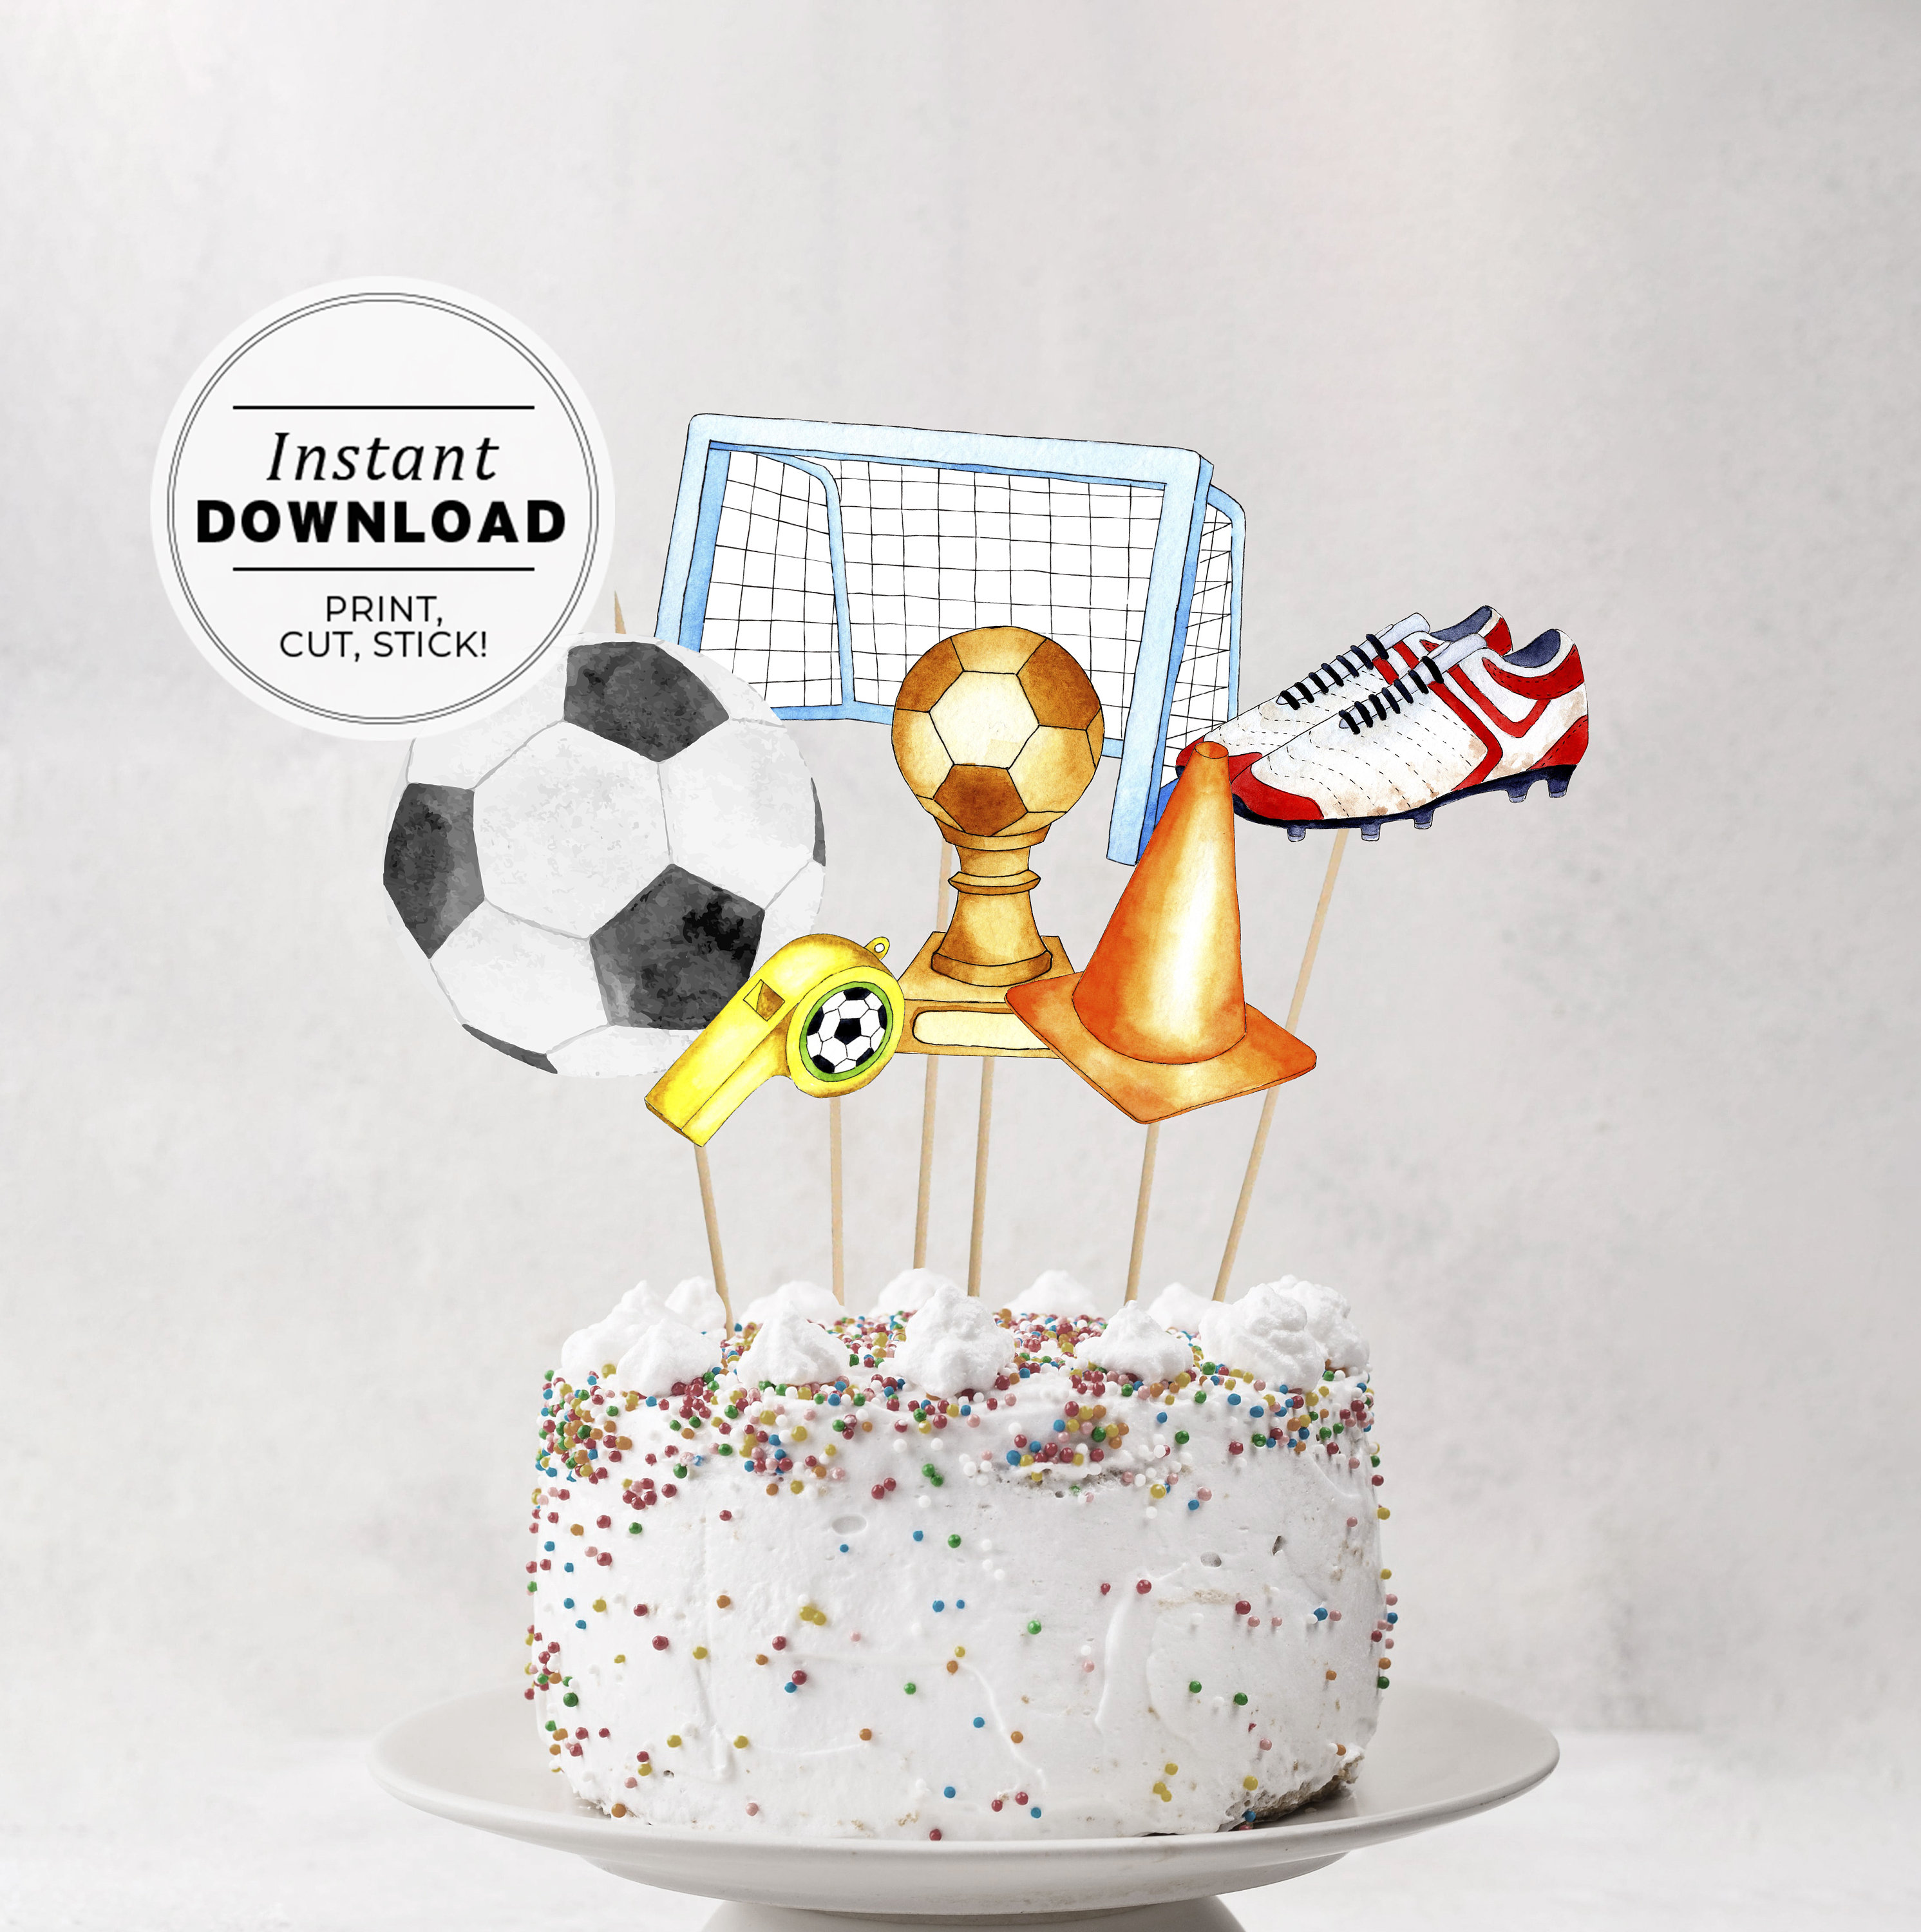 Share 85+ soccer birthday cake toppers latest - awesomeenglish.edu.vn